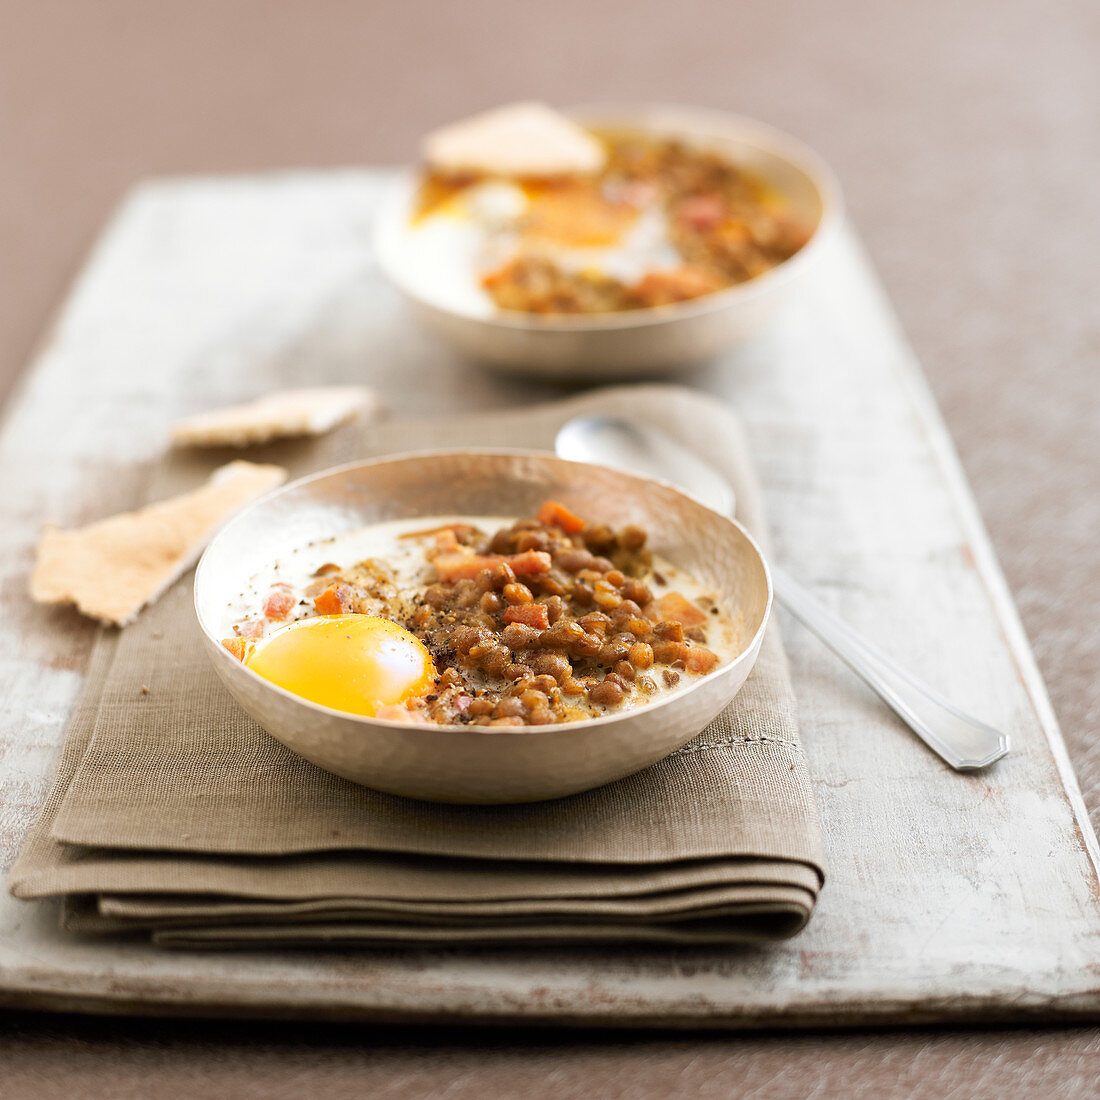 Oeuf cocotte mit Linsen-Colombo